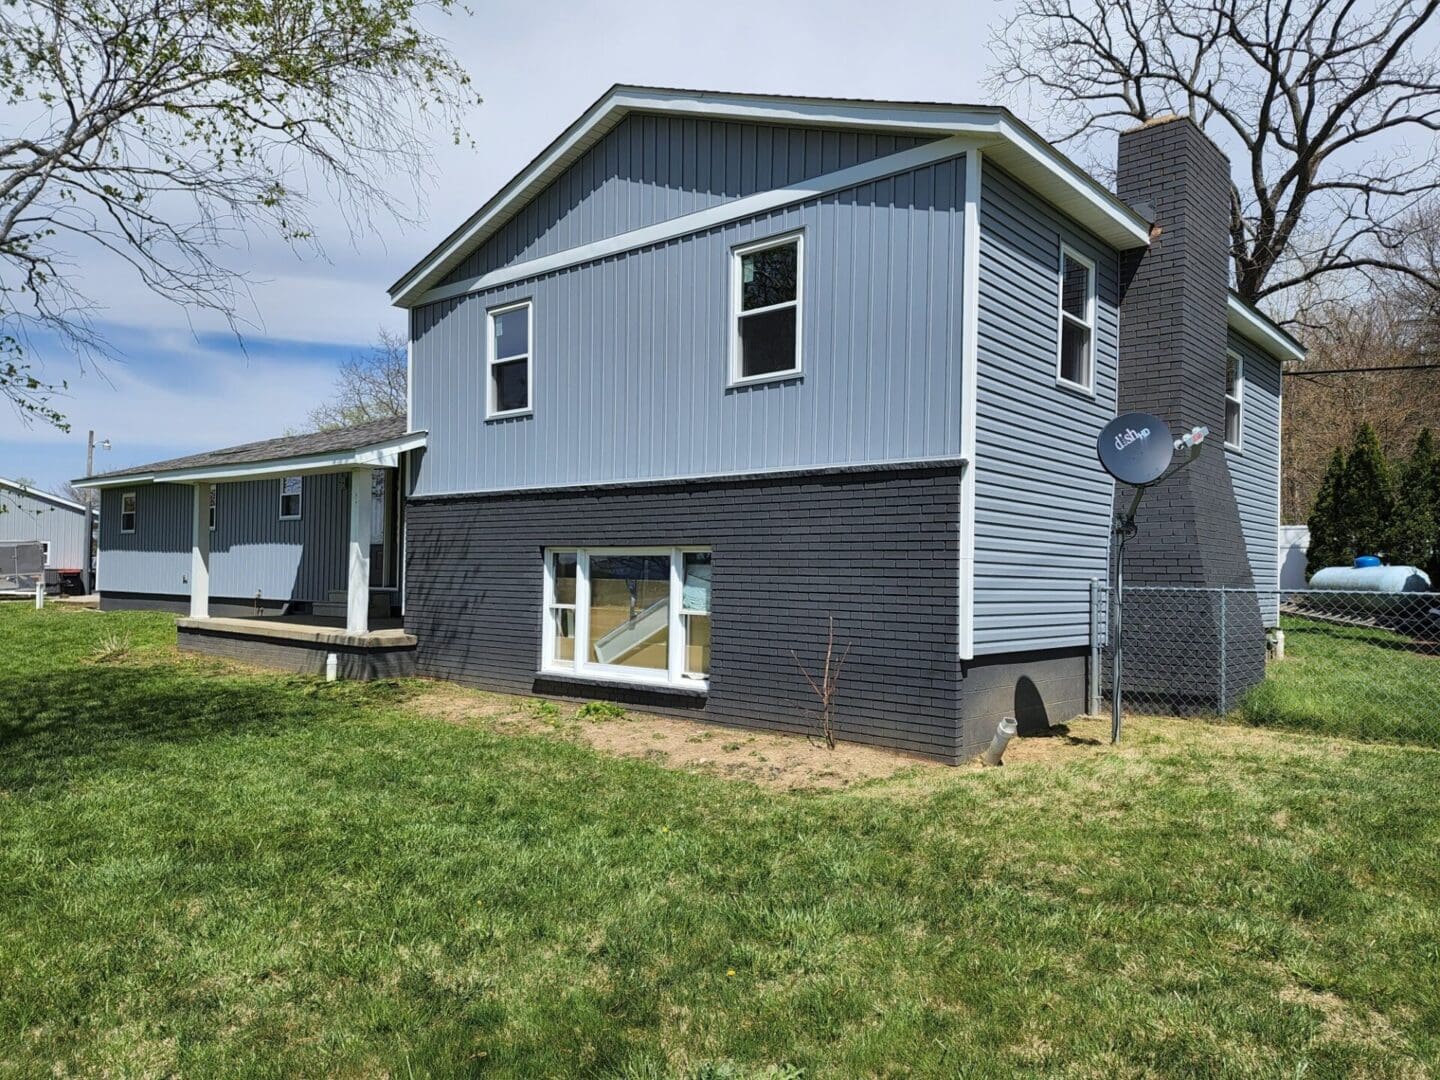 A house with blue siding and black trim.